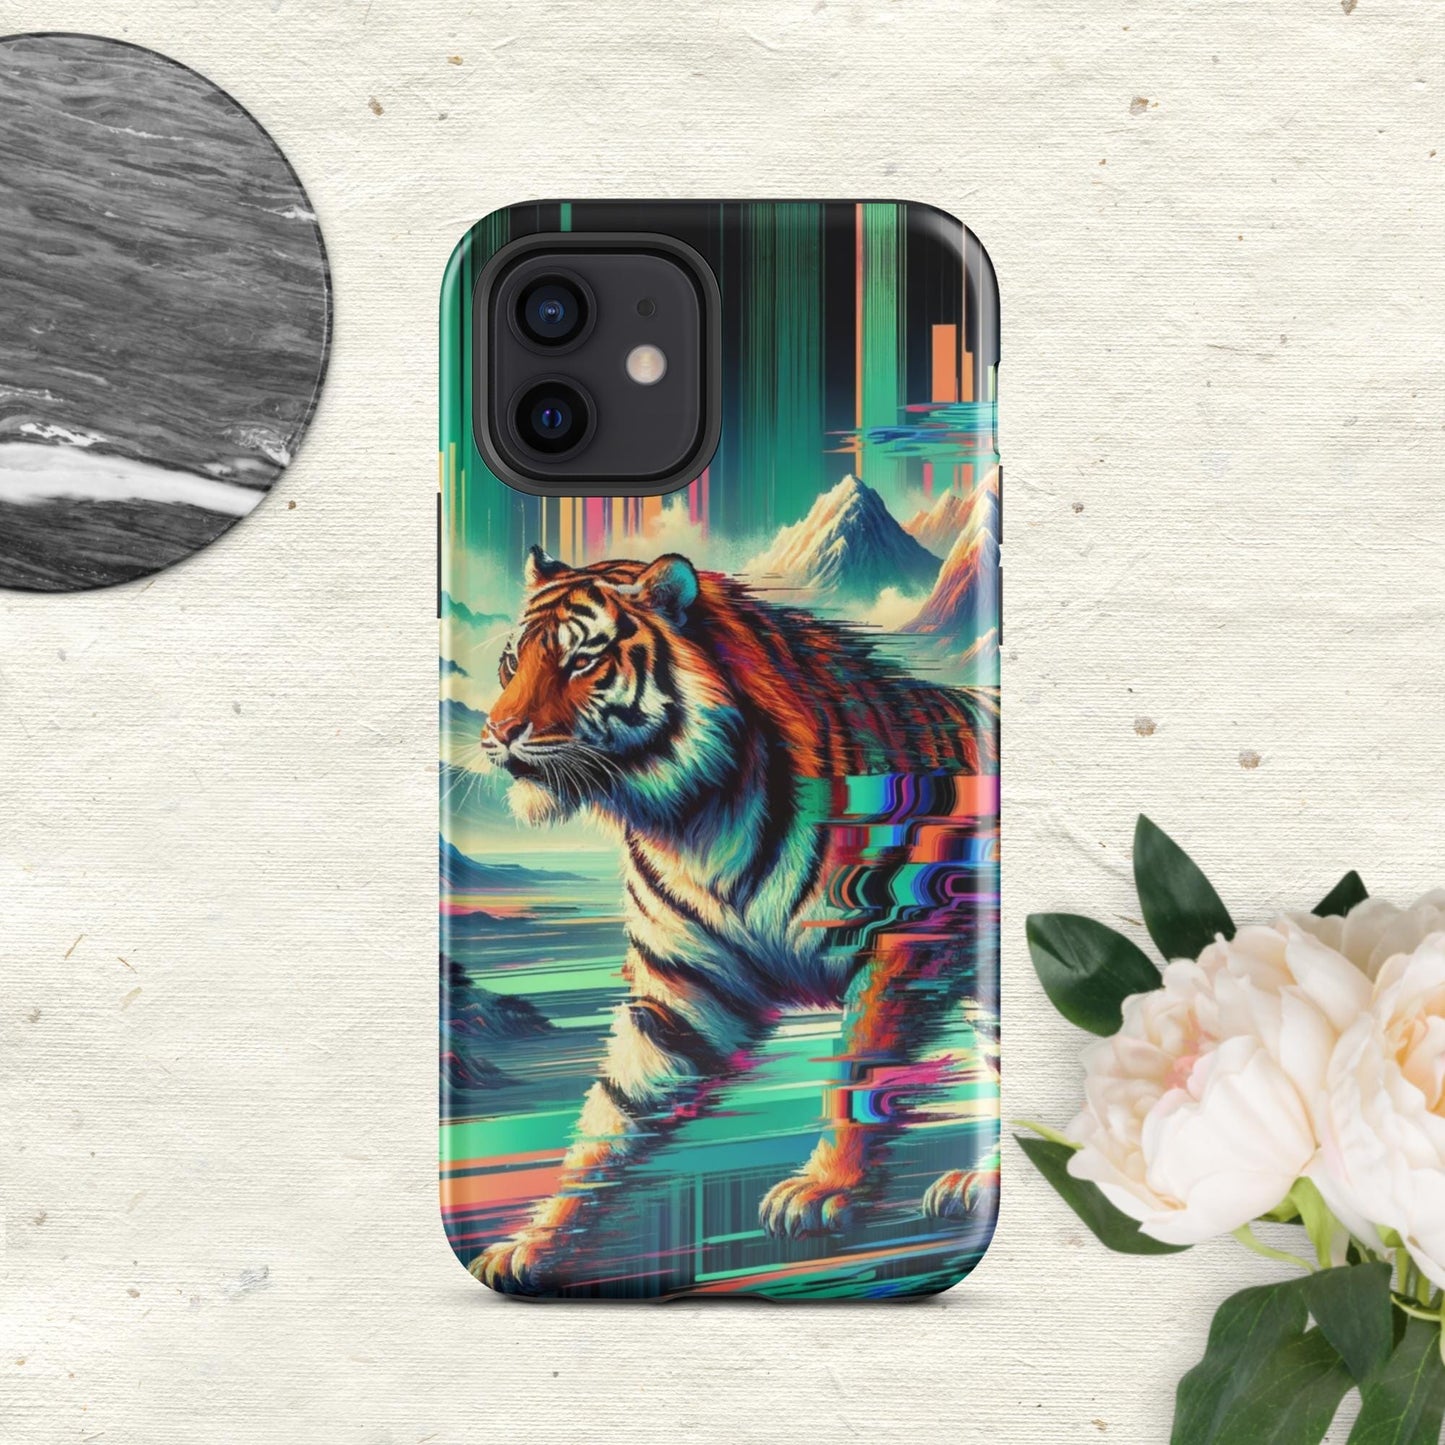 The Hologram Hook Up Glossy / iPhone 12 Tiger Glitch Tough Case for iPhone®